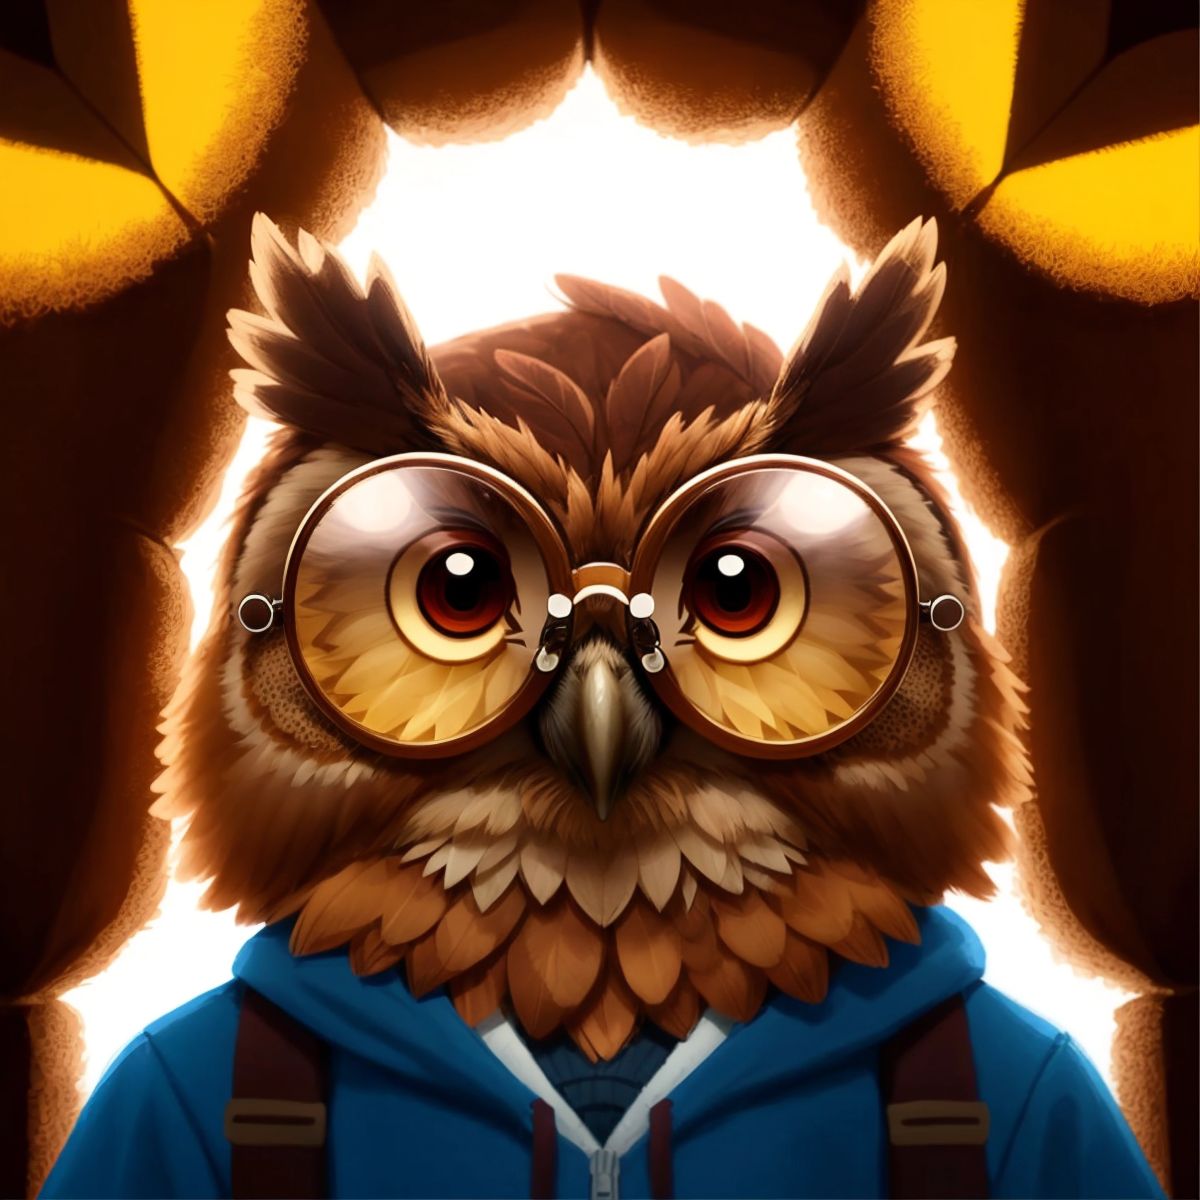 Thinky, the owl, looking through a pair of glasses that show a different world, symbolizing the difference between reality and imagination.